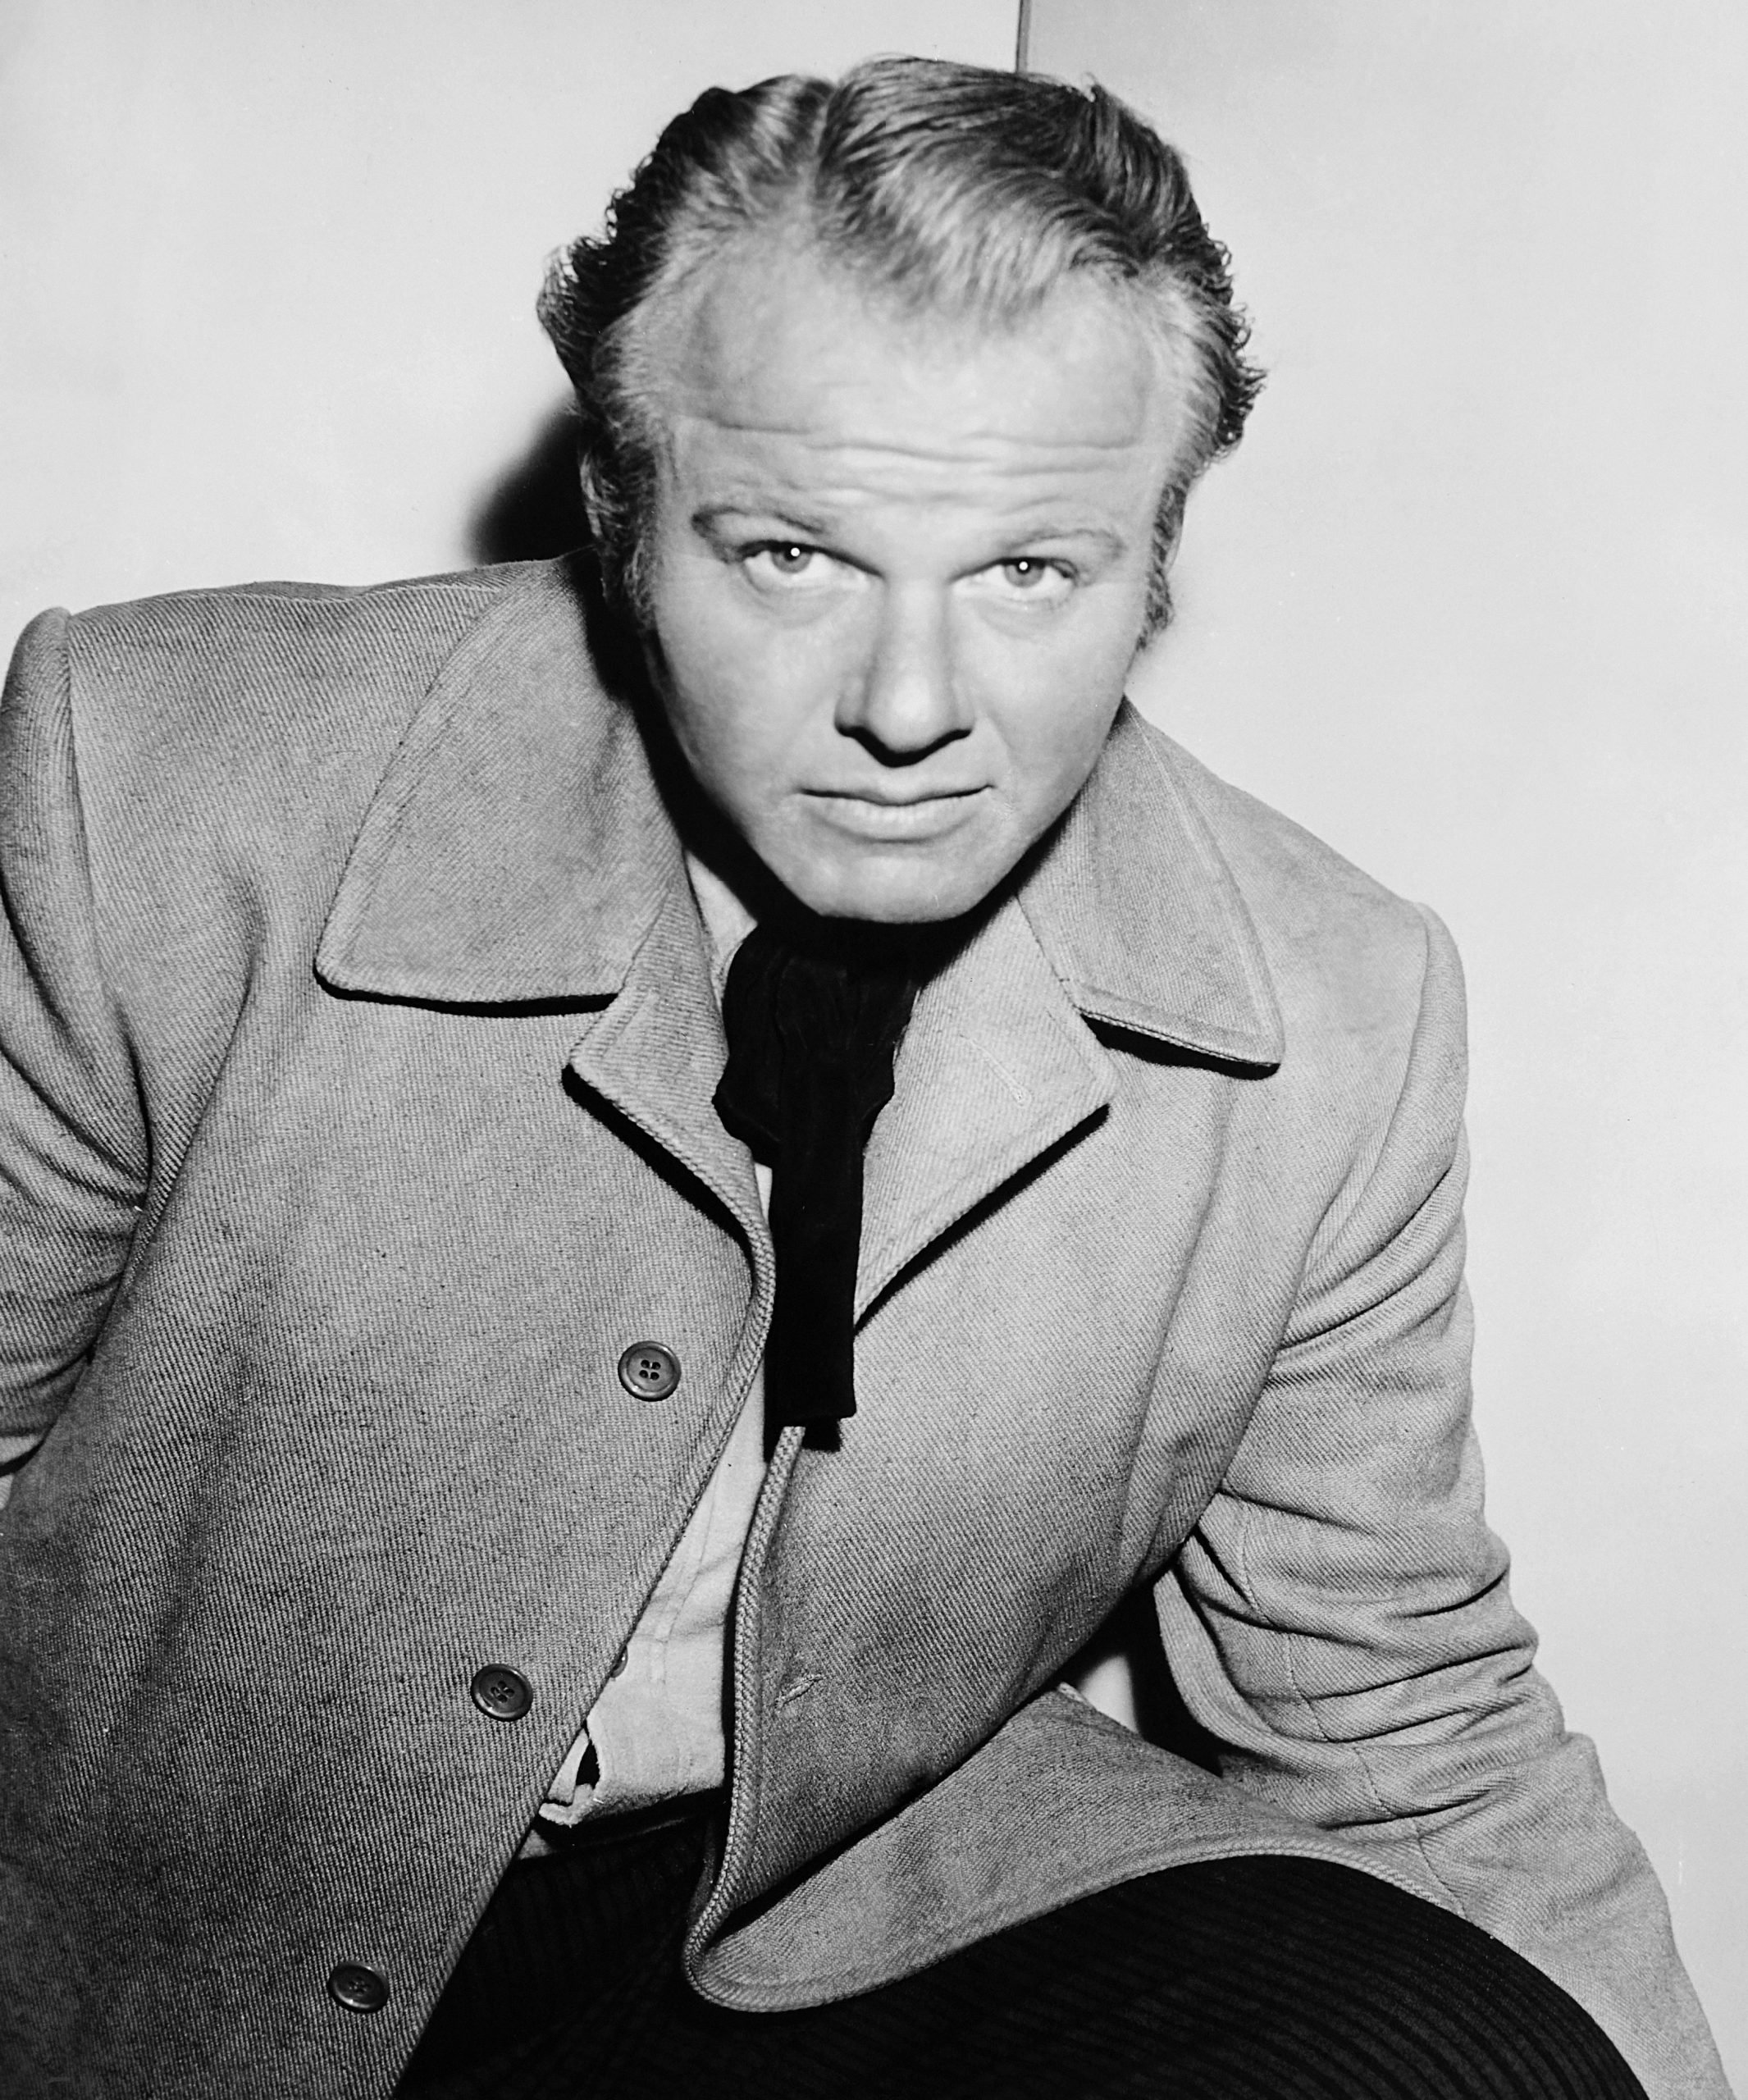 Alan Hale Jr. had his father's looks, voice, and skill with character acting